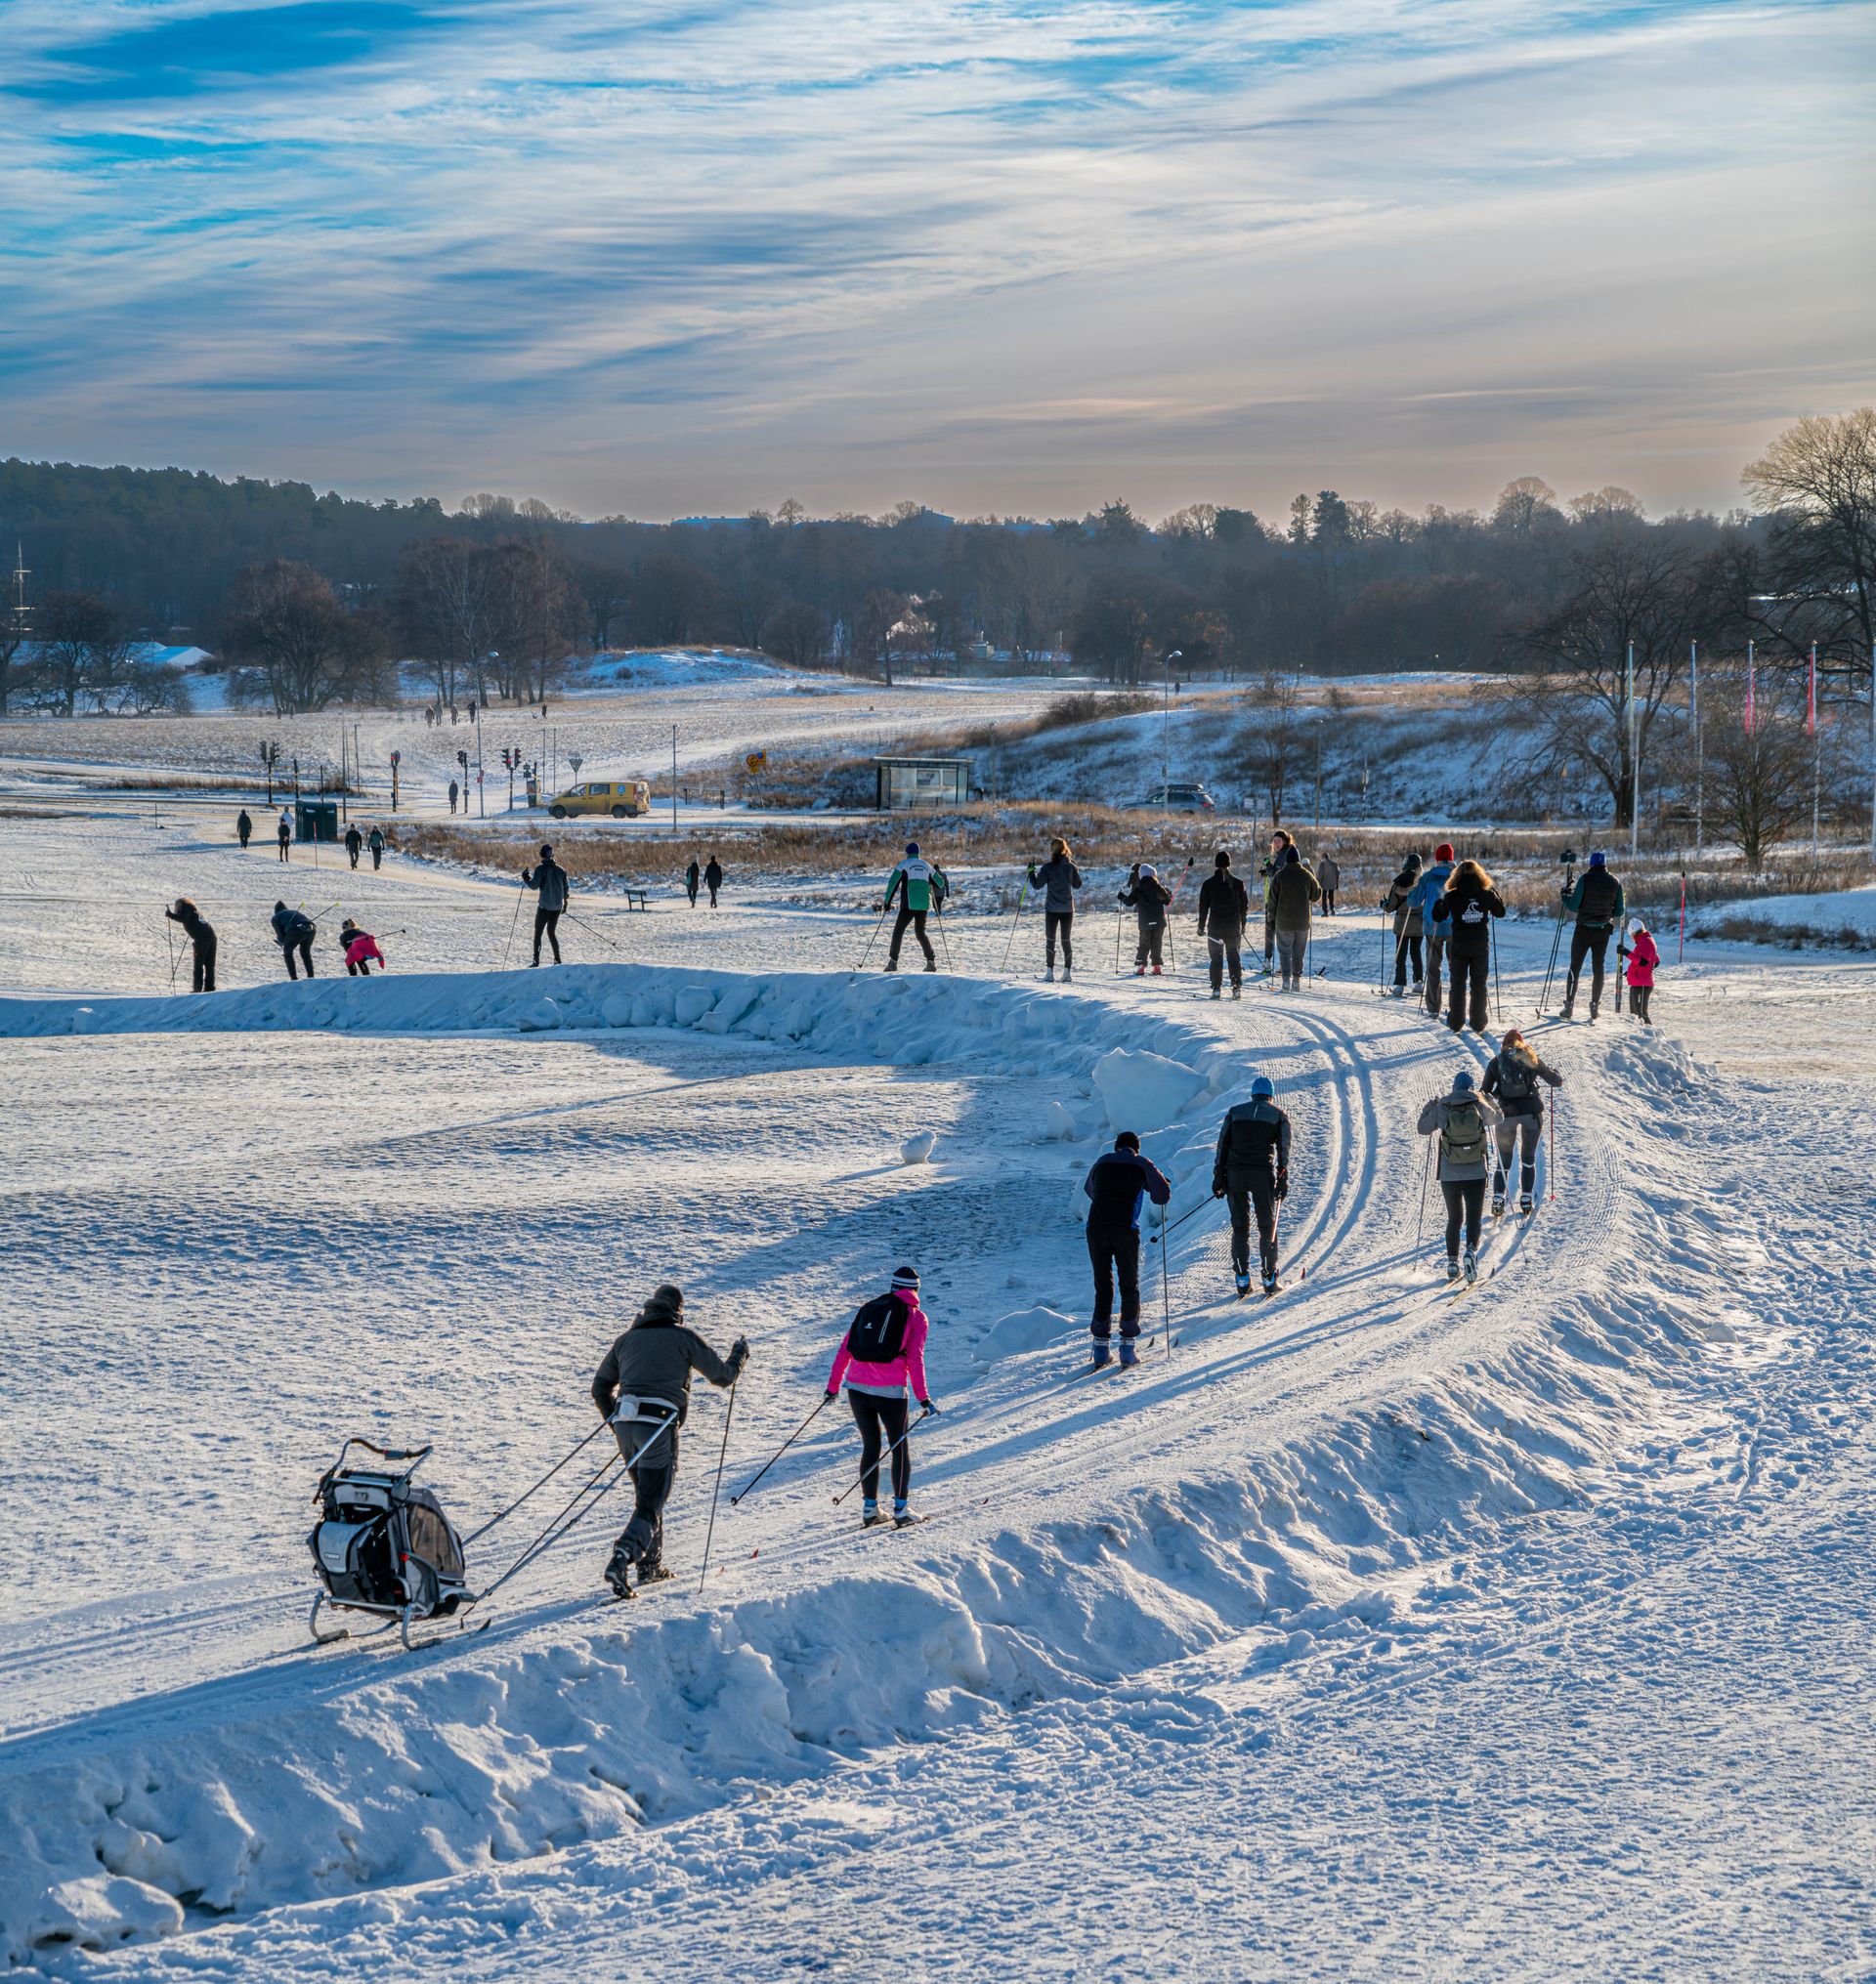 A group of cross-country skiers on a snow-covered trail winding through an open field.